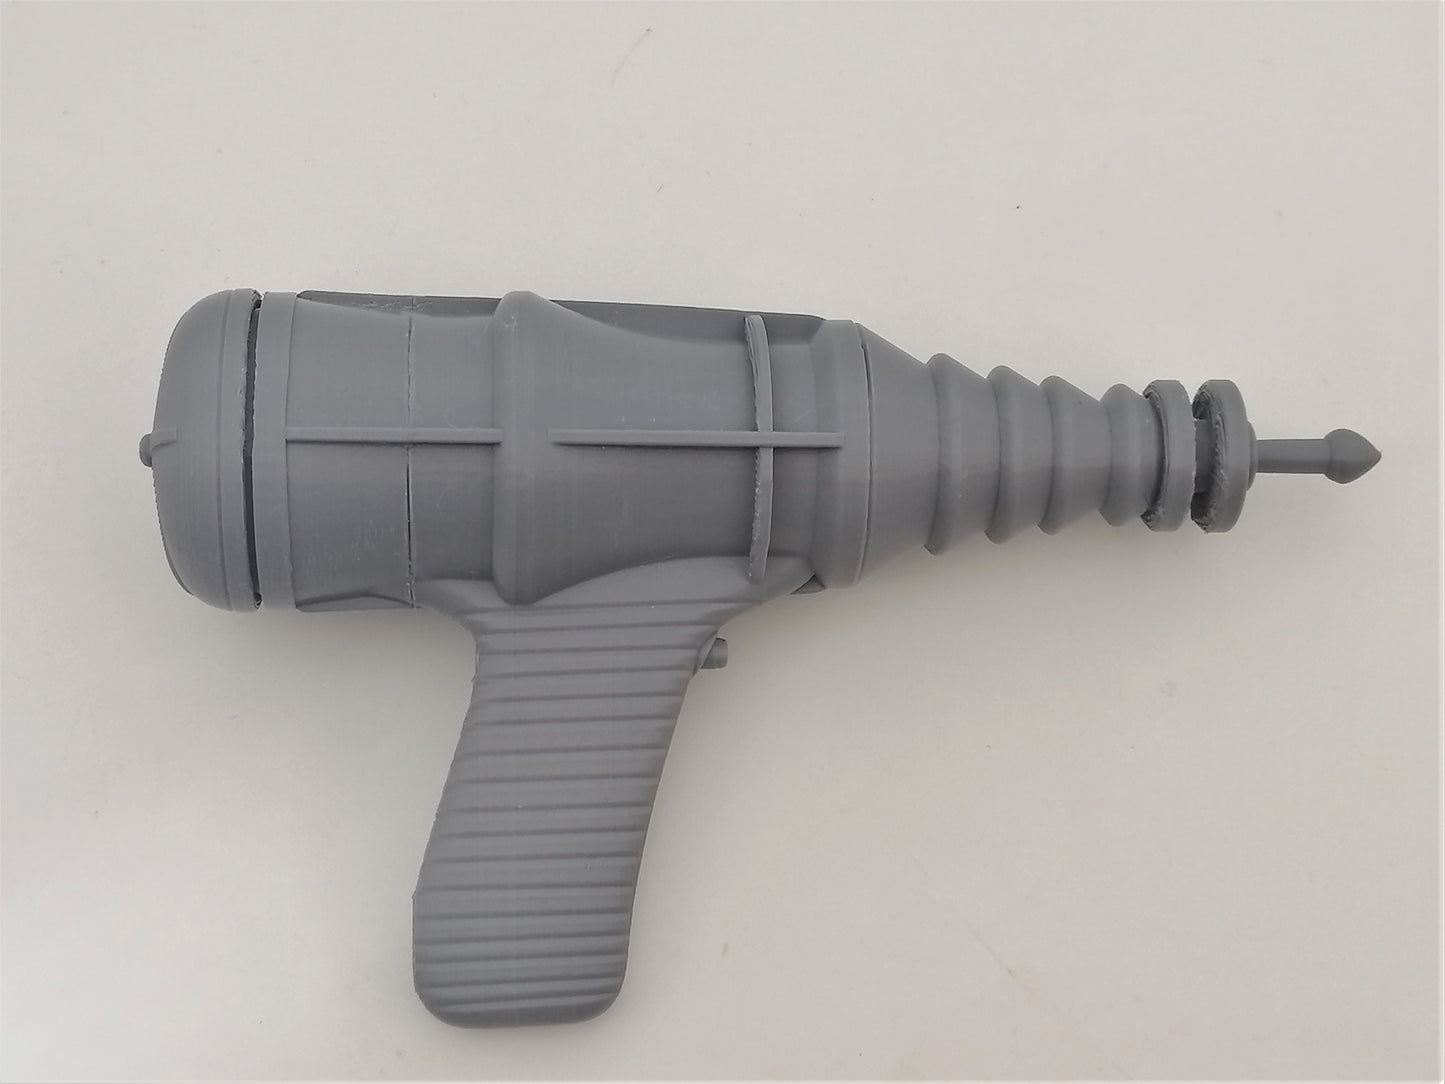 The Illuminating Blaster from Forbidden Planet - Sci-fi Replica Prop - 3D Printed